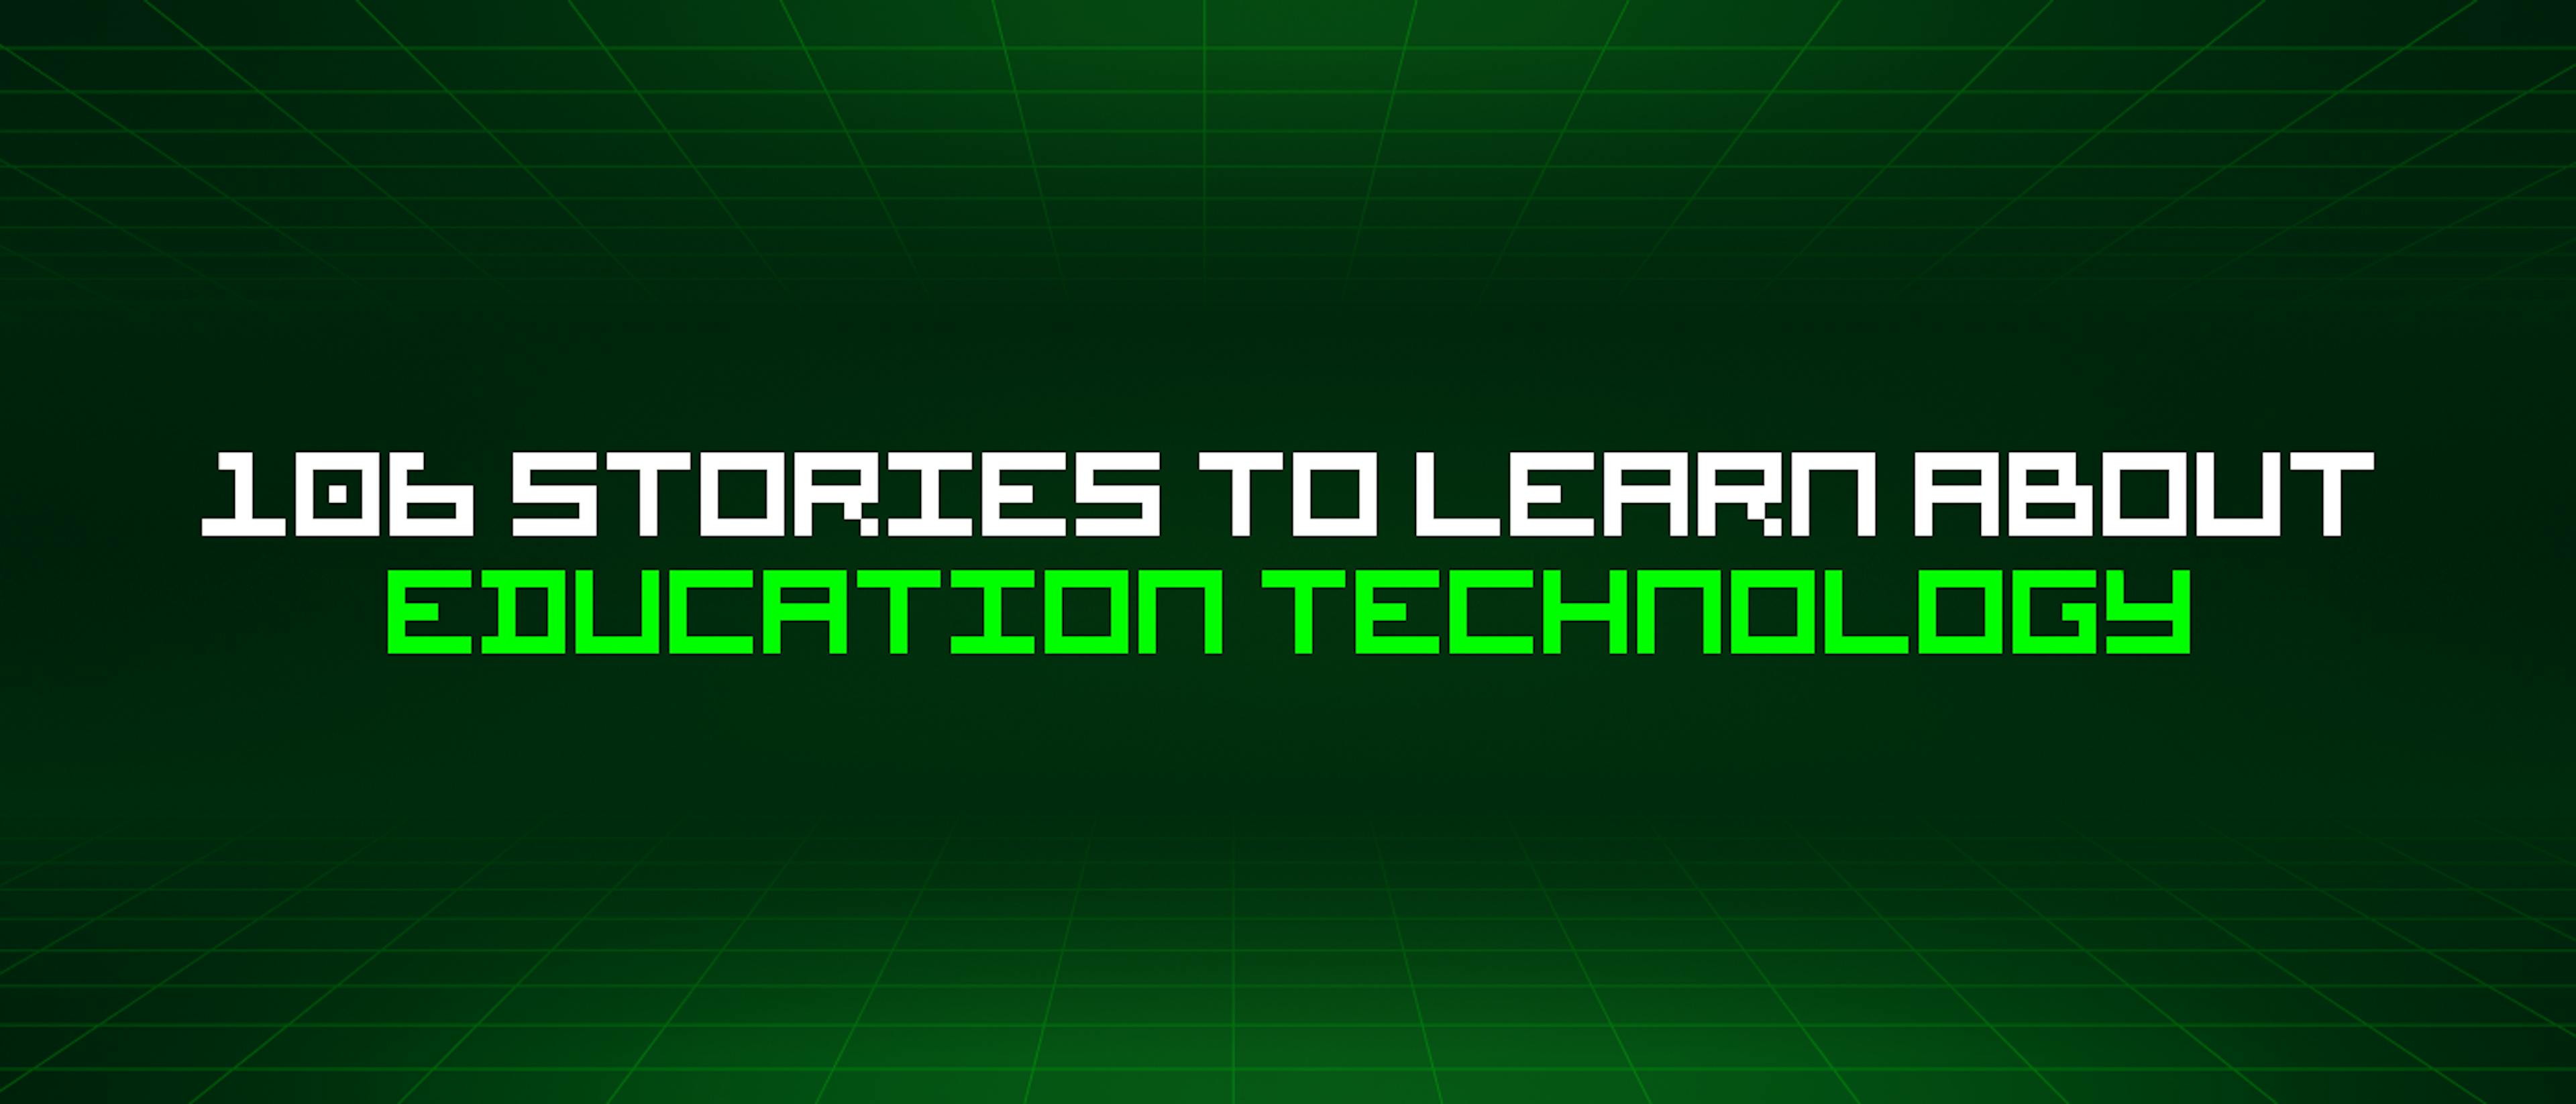 /106-stories-to-learn-about-education-technology feature image